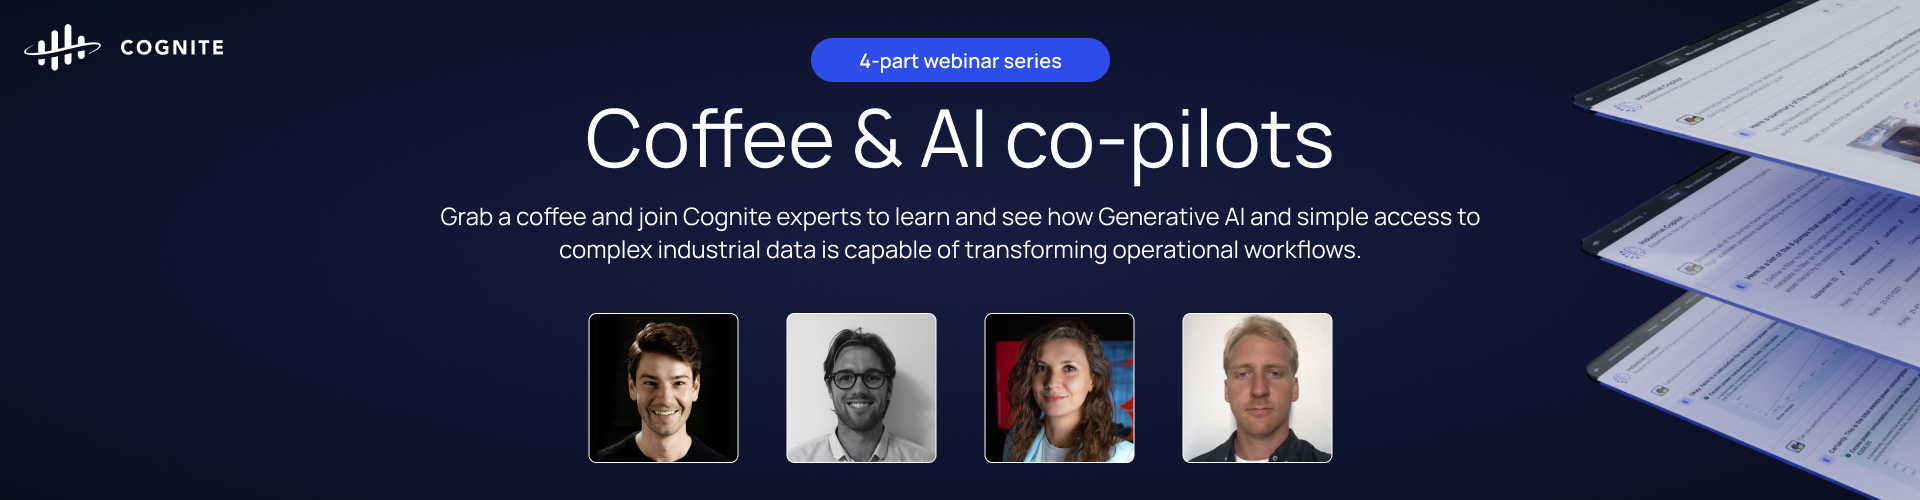 coffee-and-ai-co-pilots-banner-1